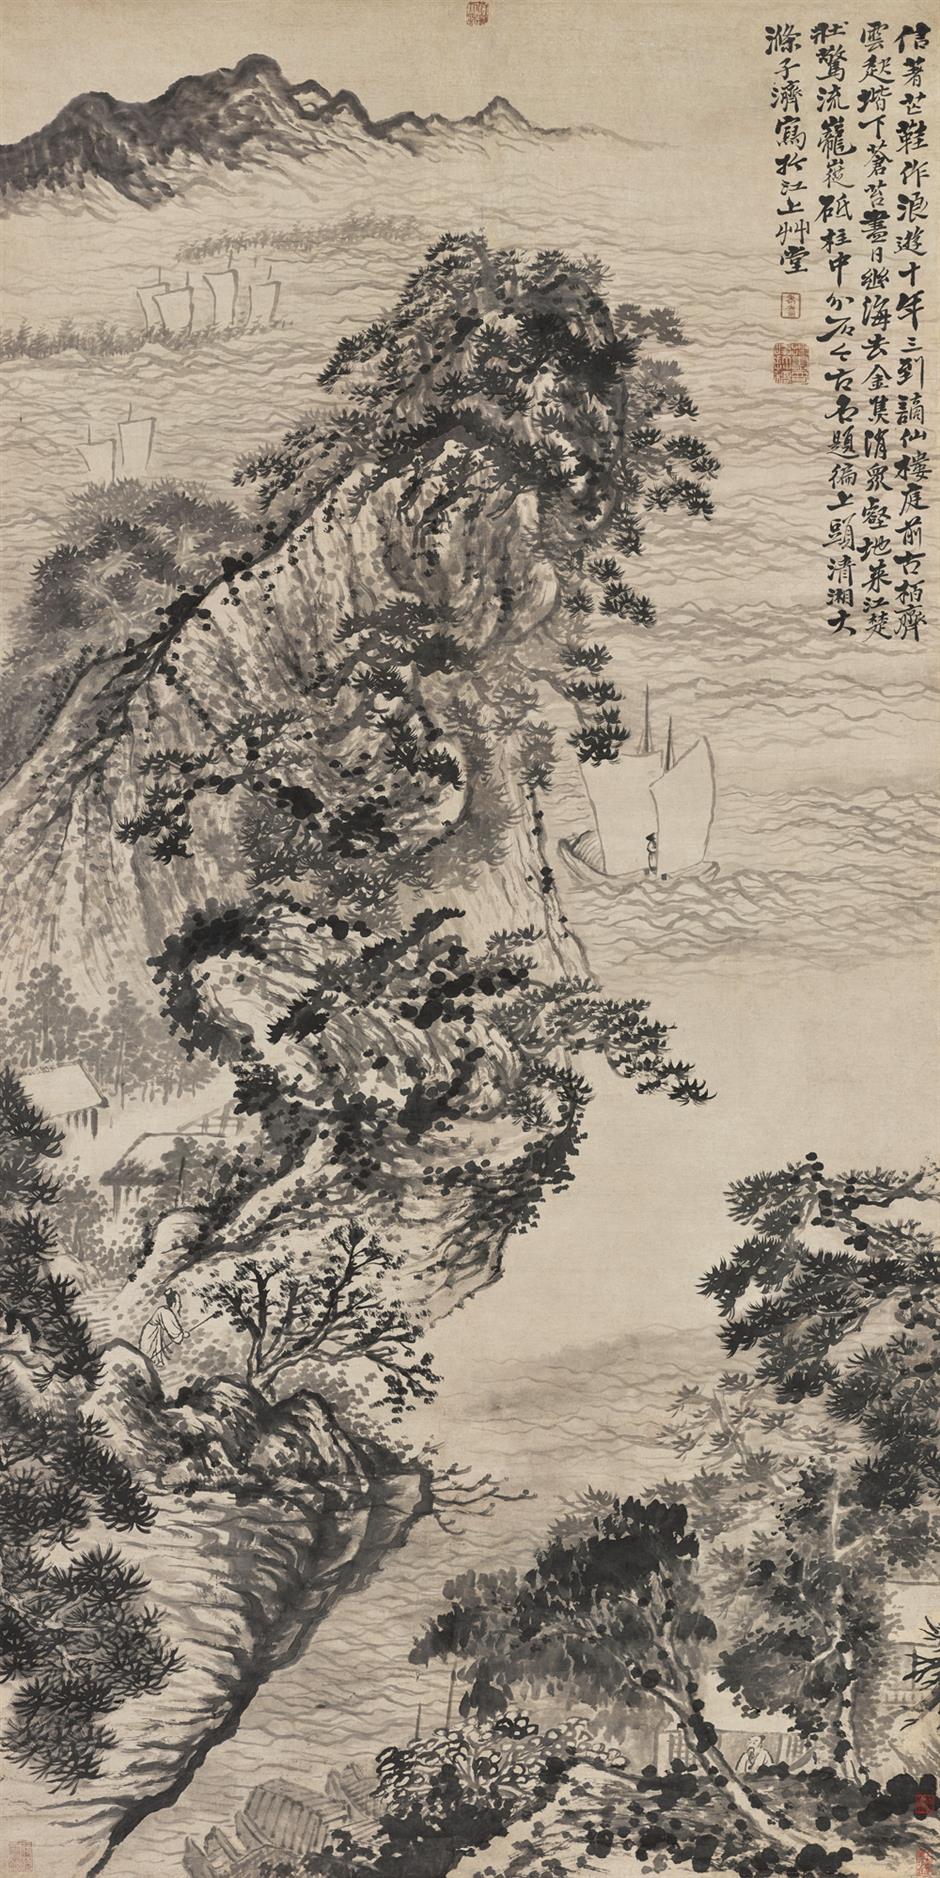 Ink-wash paintings are highlight of Bowring Auction